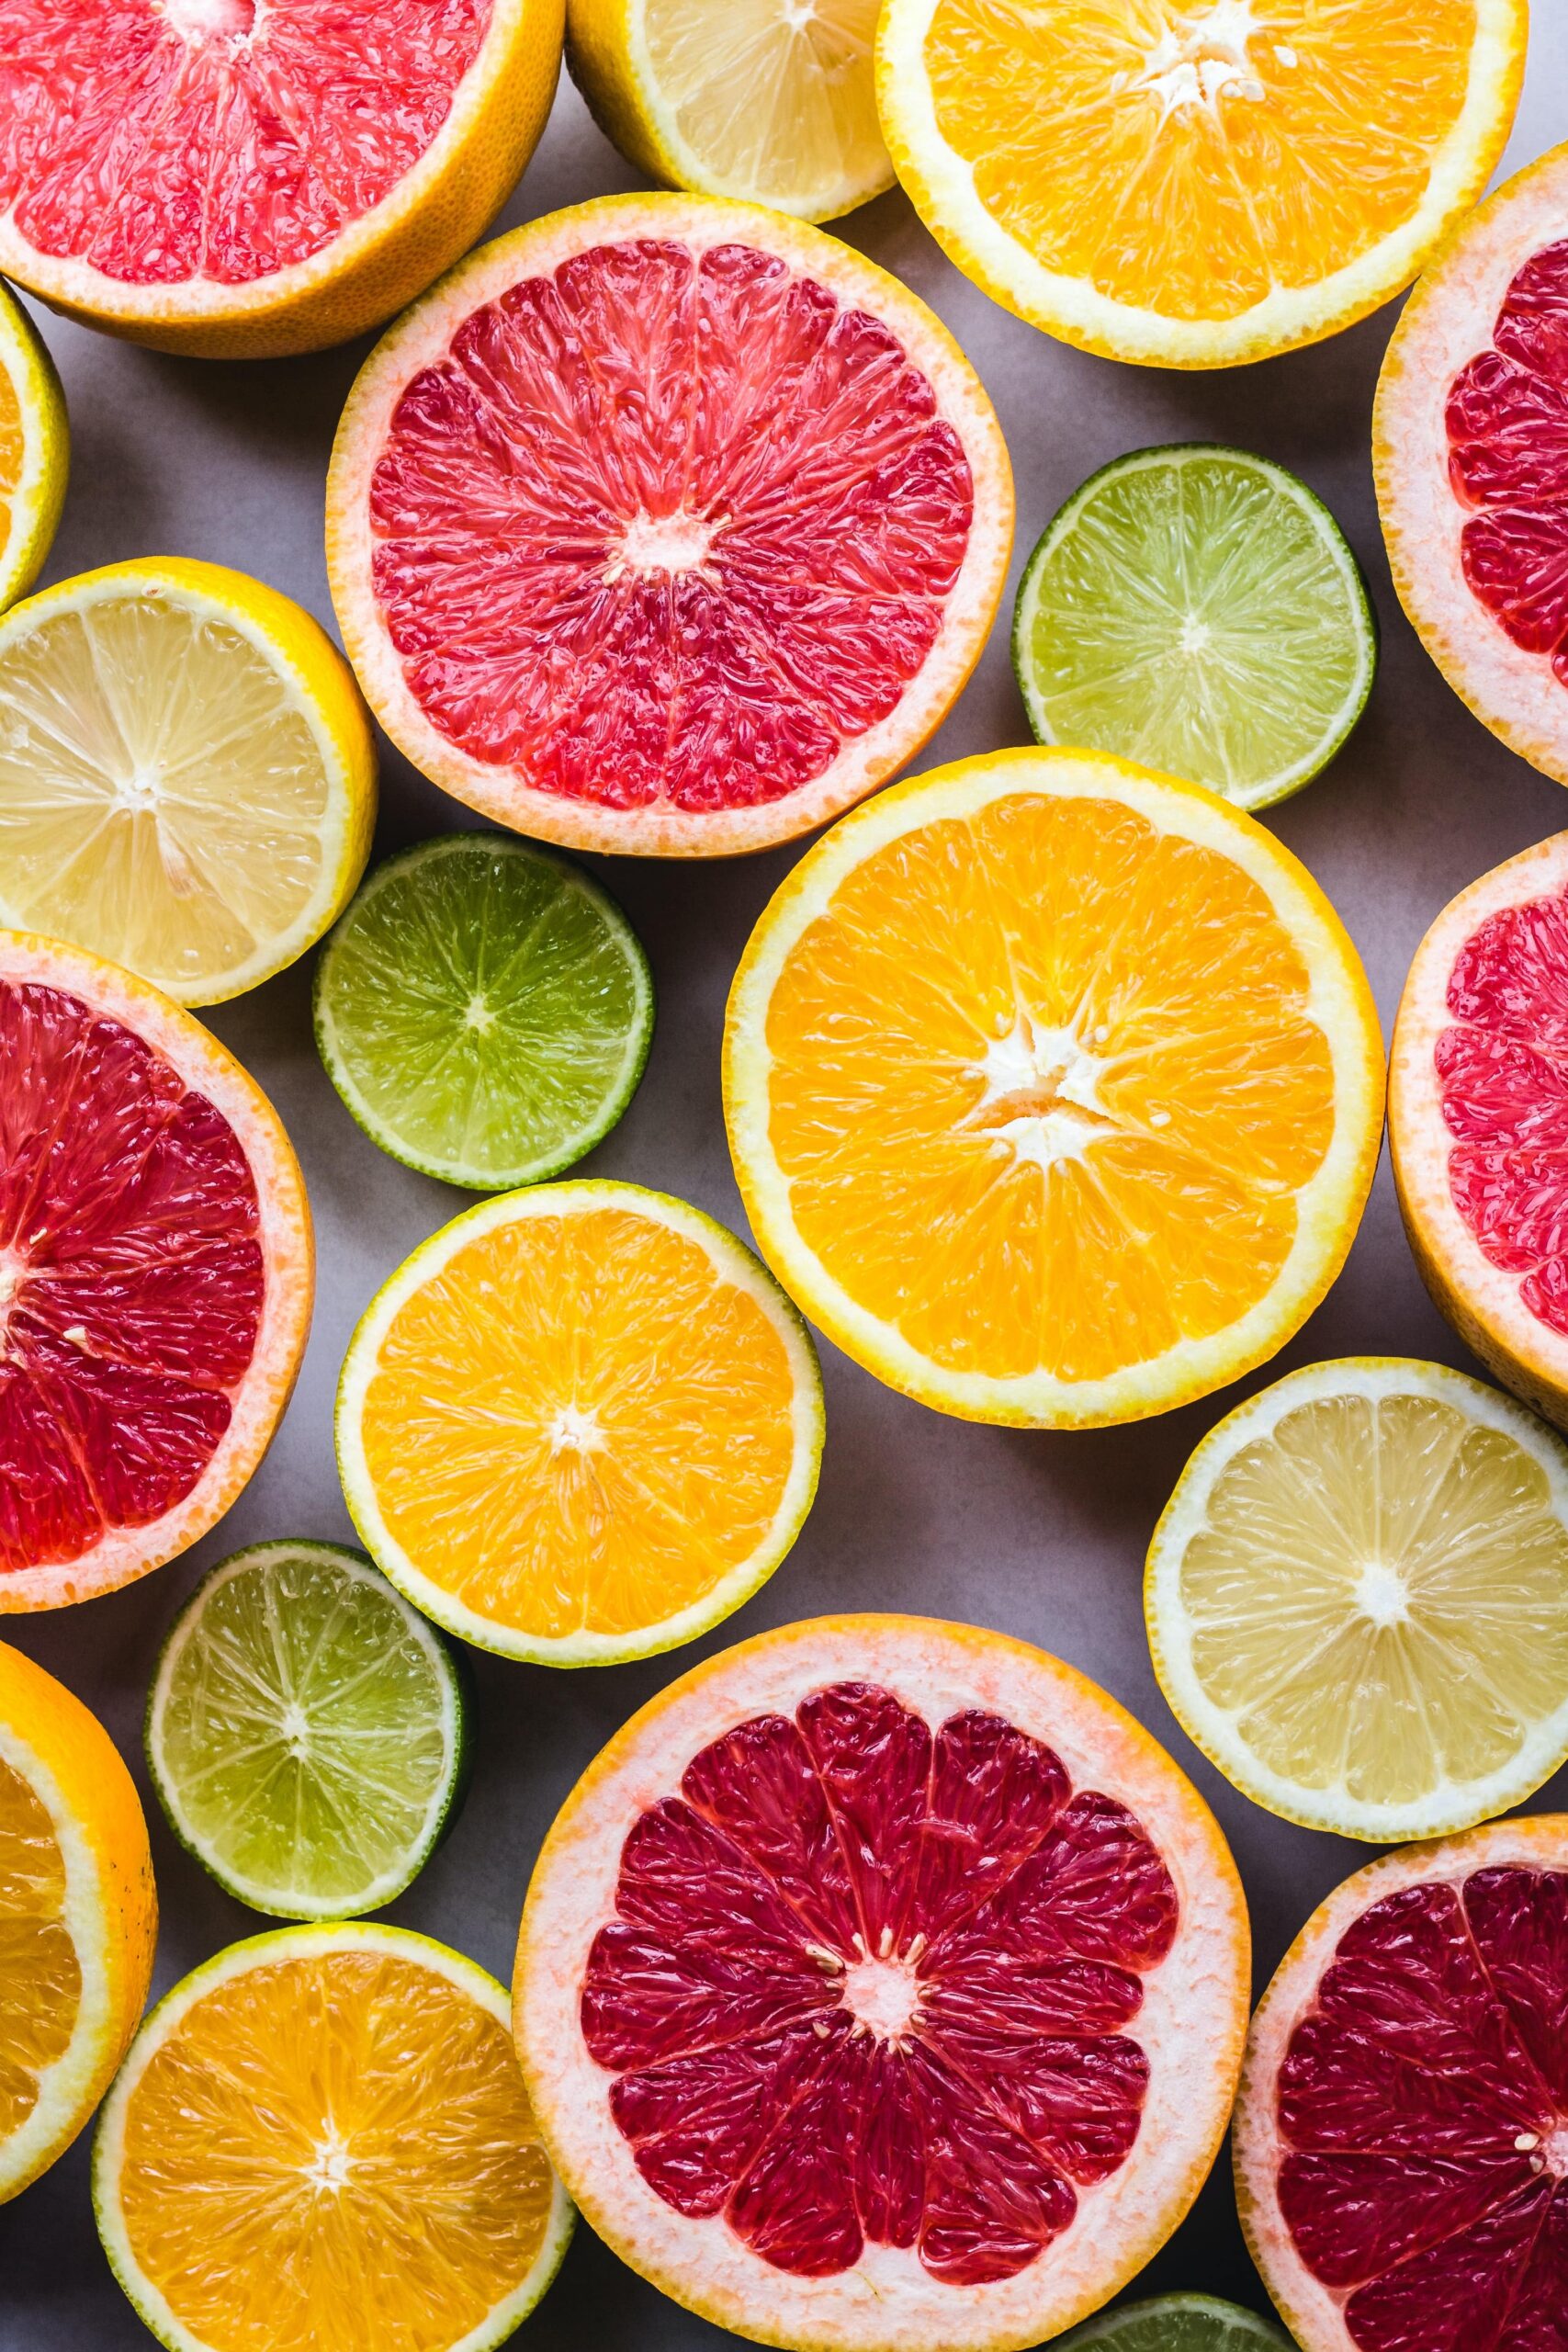 Anti-aging tip about vitamin C. A photo of citrus fruits which contain vitamin C.